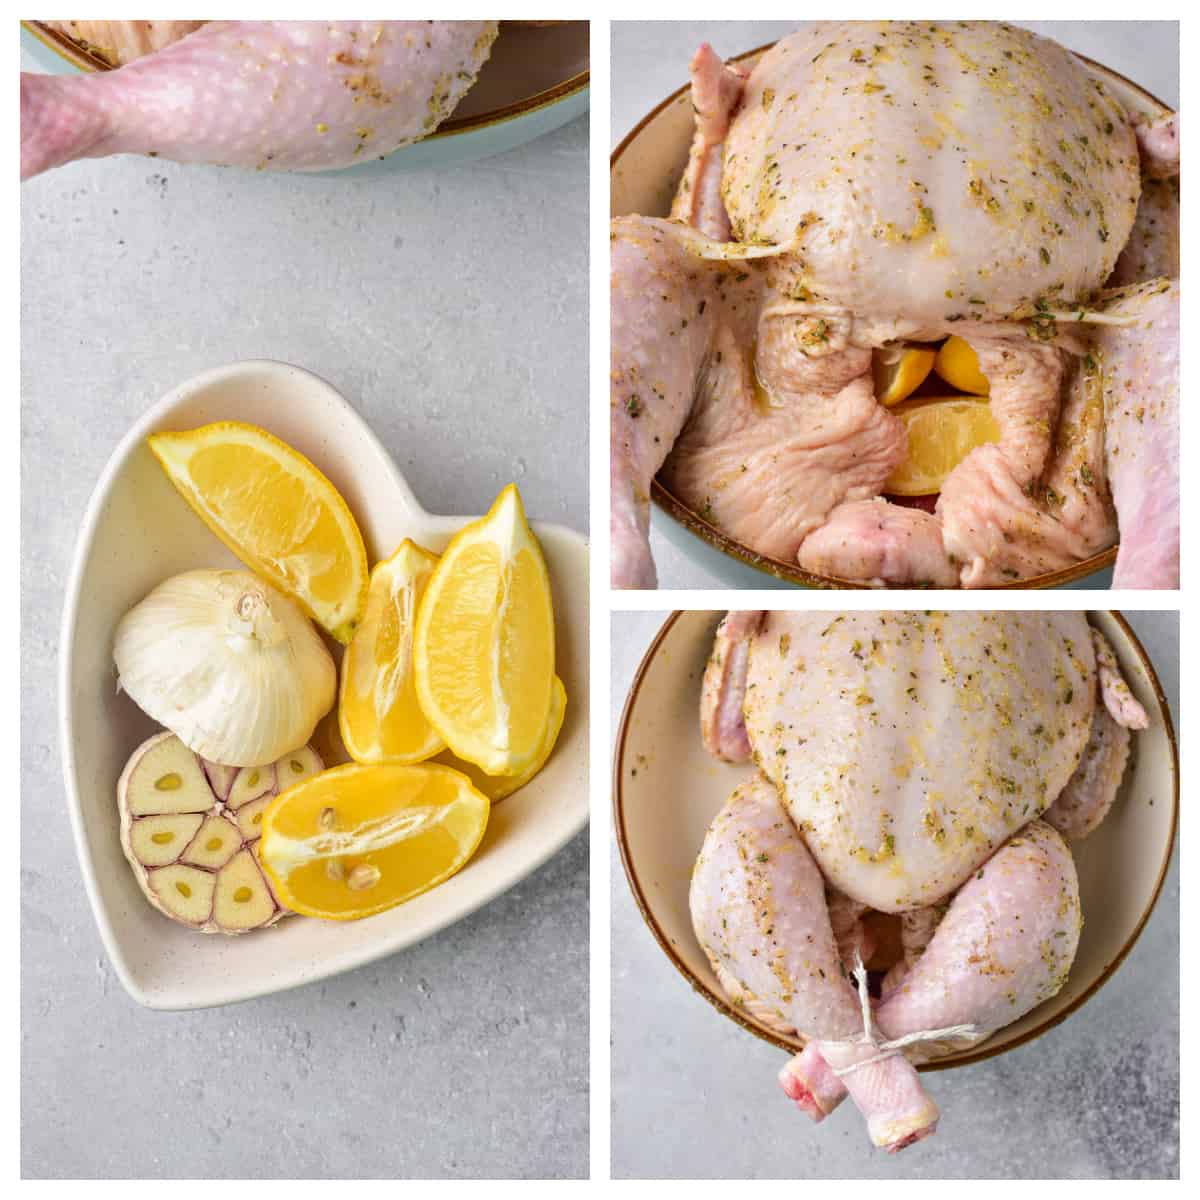 Cut lemons and garlic, and stuffed into the chicken cavity.